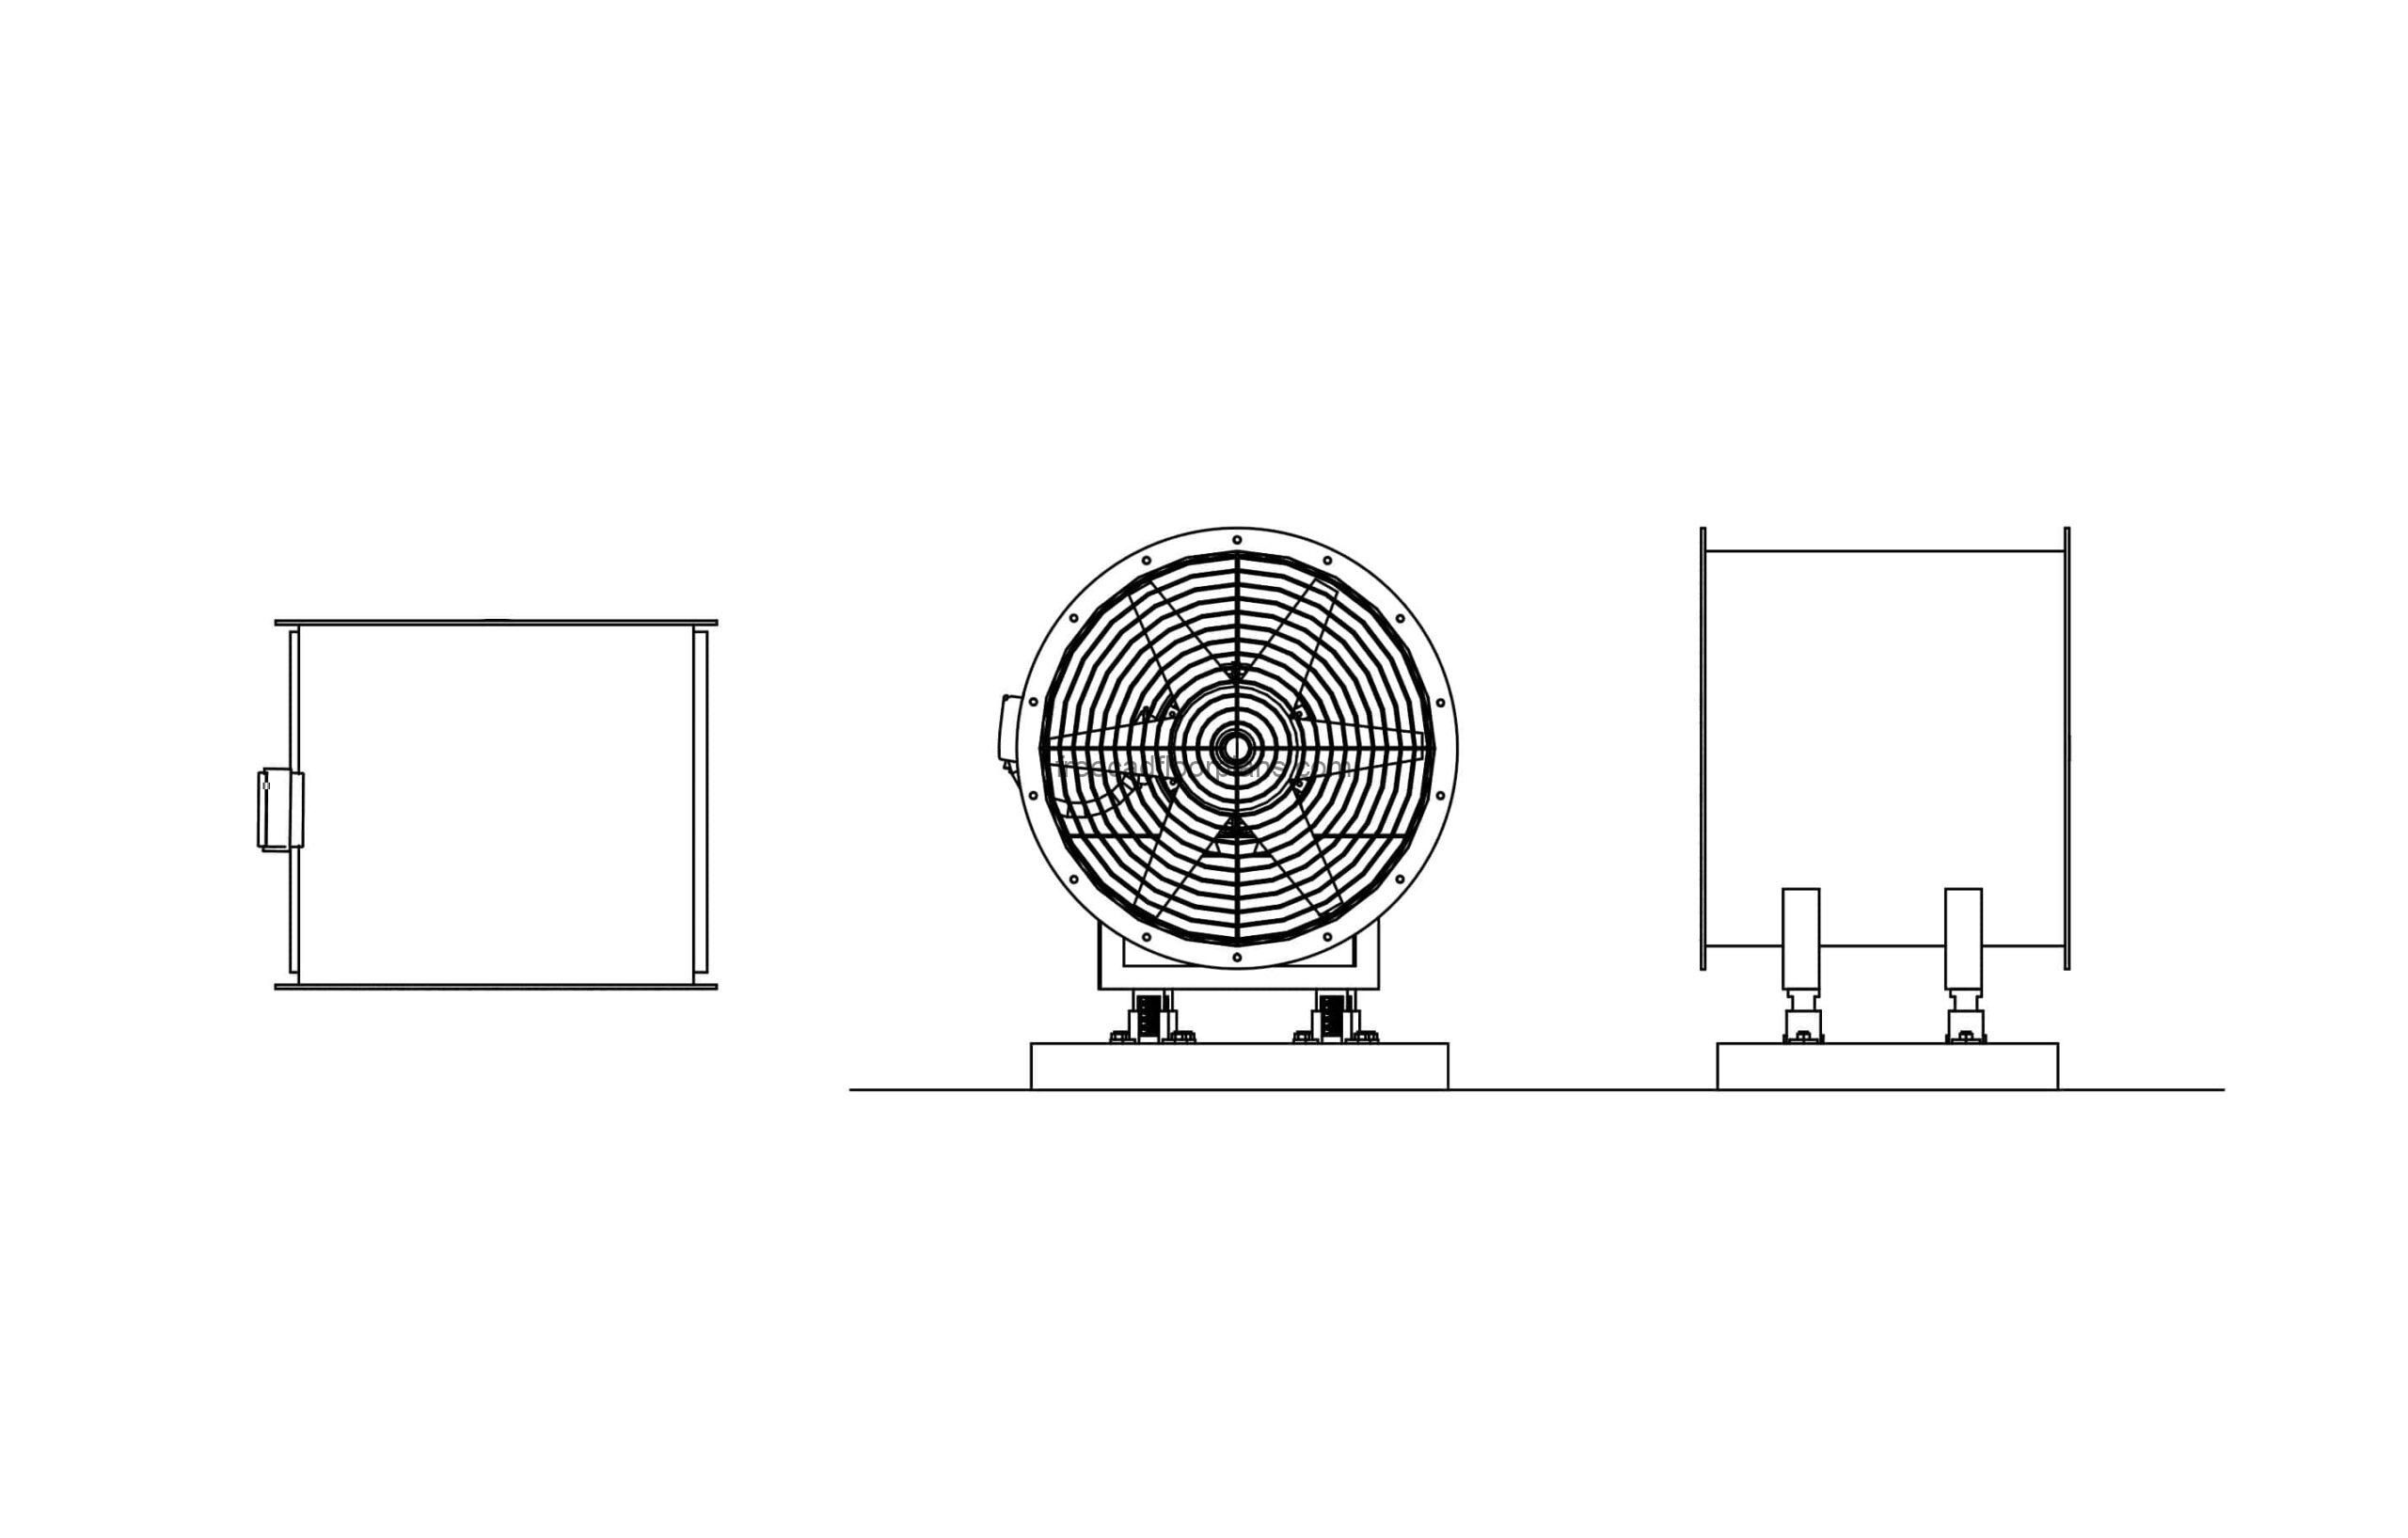 autocad drawing of an axial fan plan and elevations 2d views, file for free download